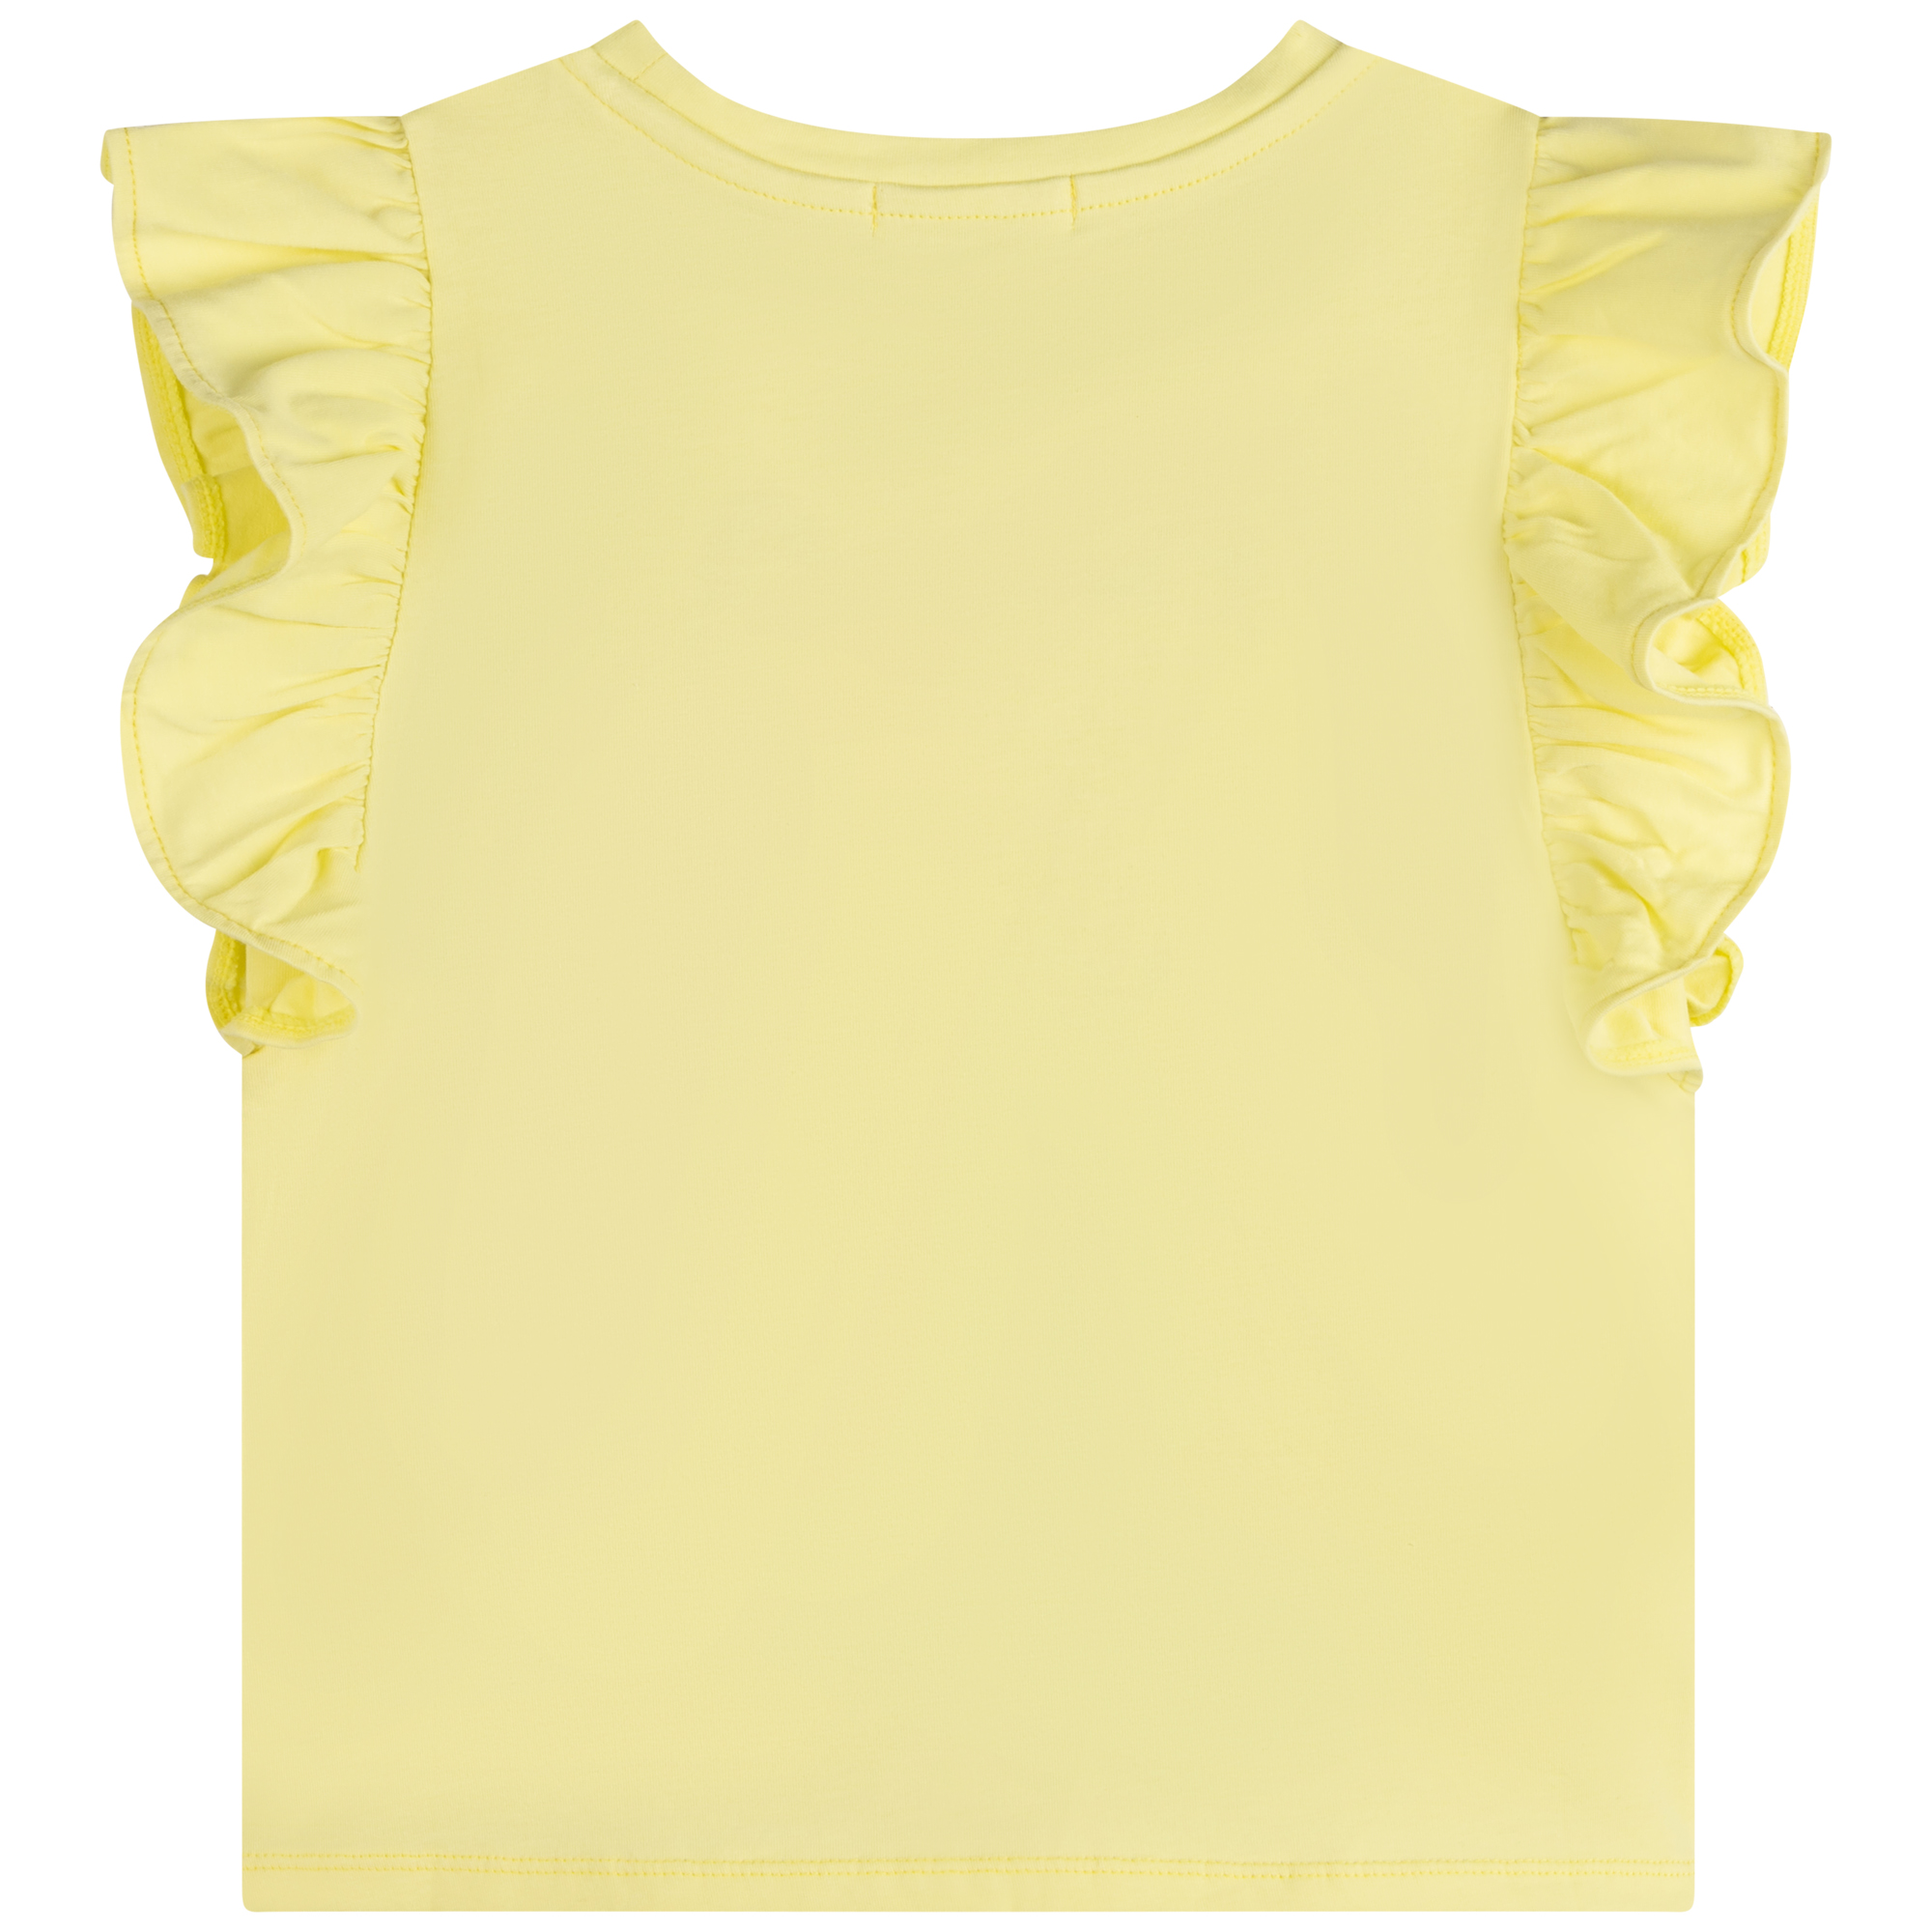 Tee-shirt manches courtes CHARABIA pour FILLE